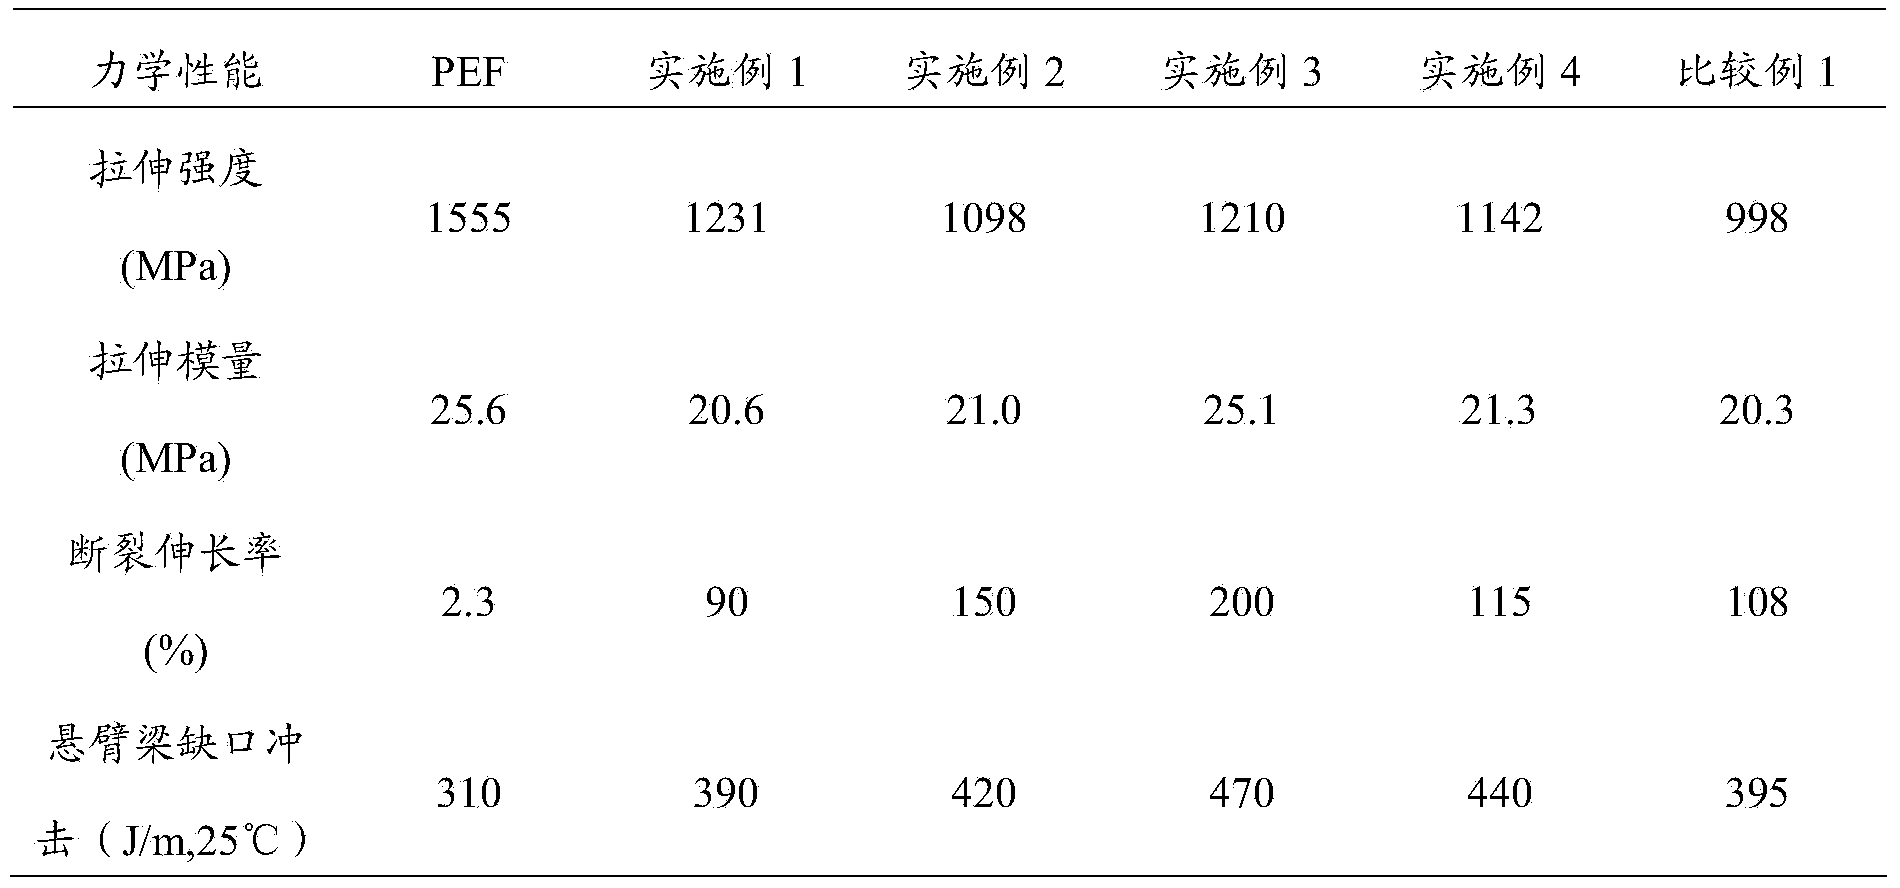 Poly-2,5-furandicarboxylic acid glycol ester composite material and preparation method thereof